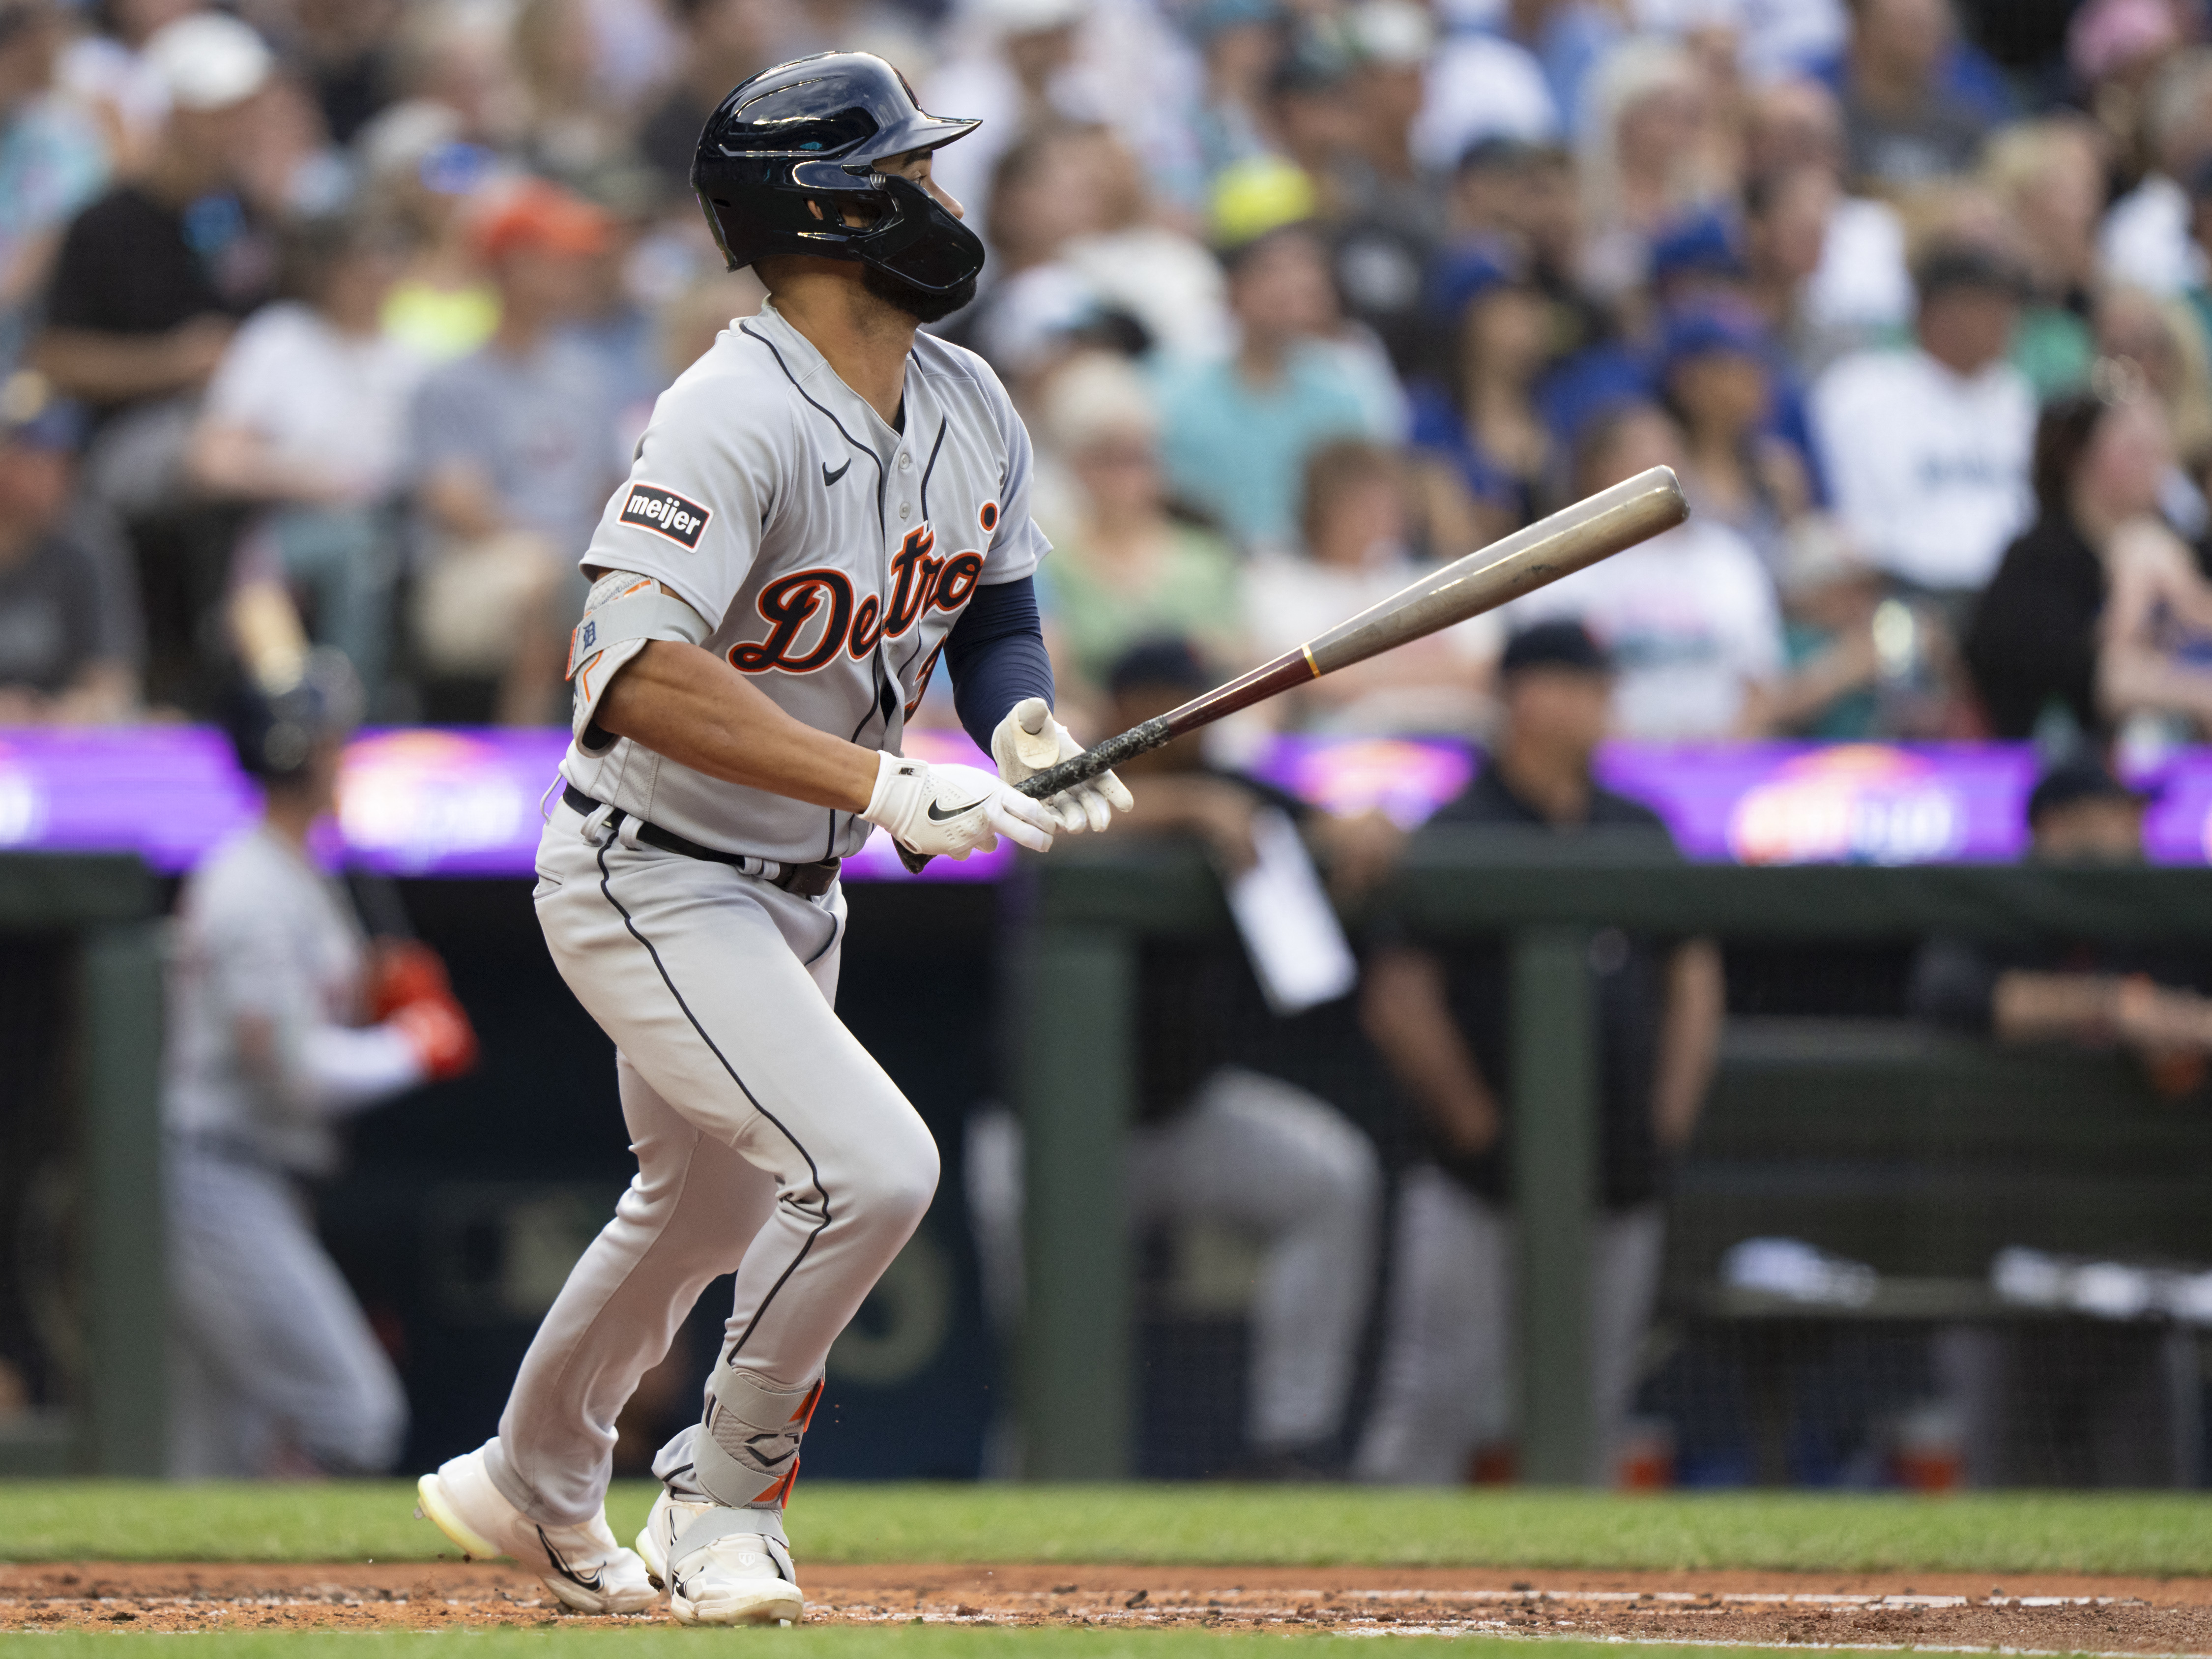 Tigers hold Mariners to three hits in 6-0 shutout